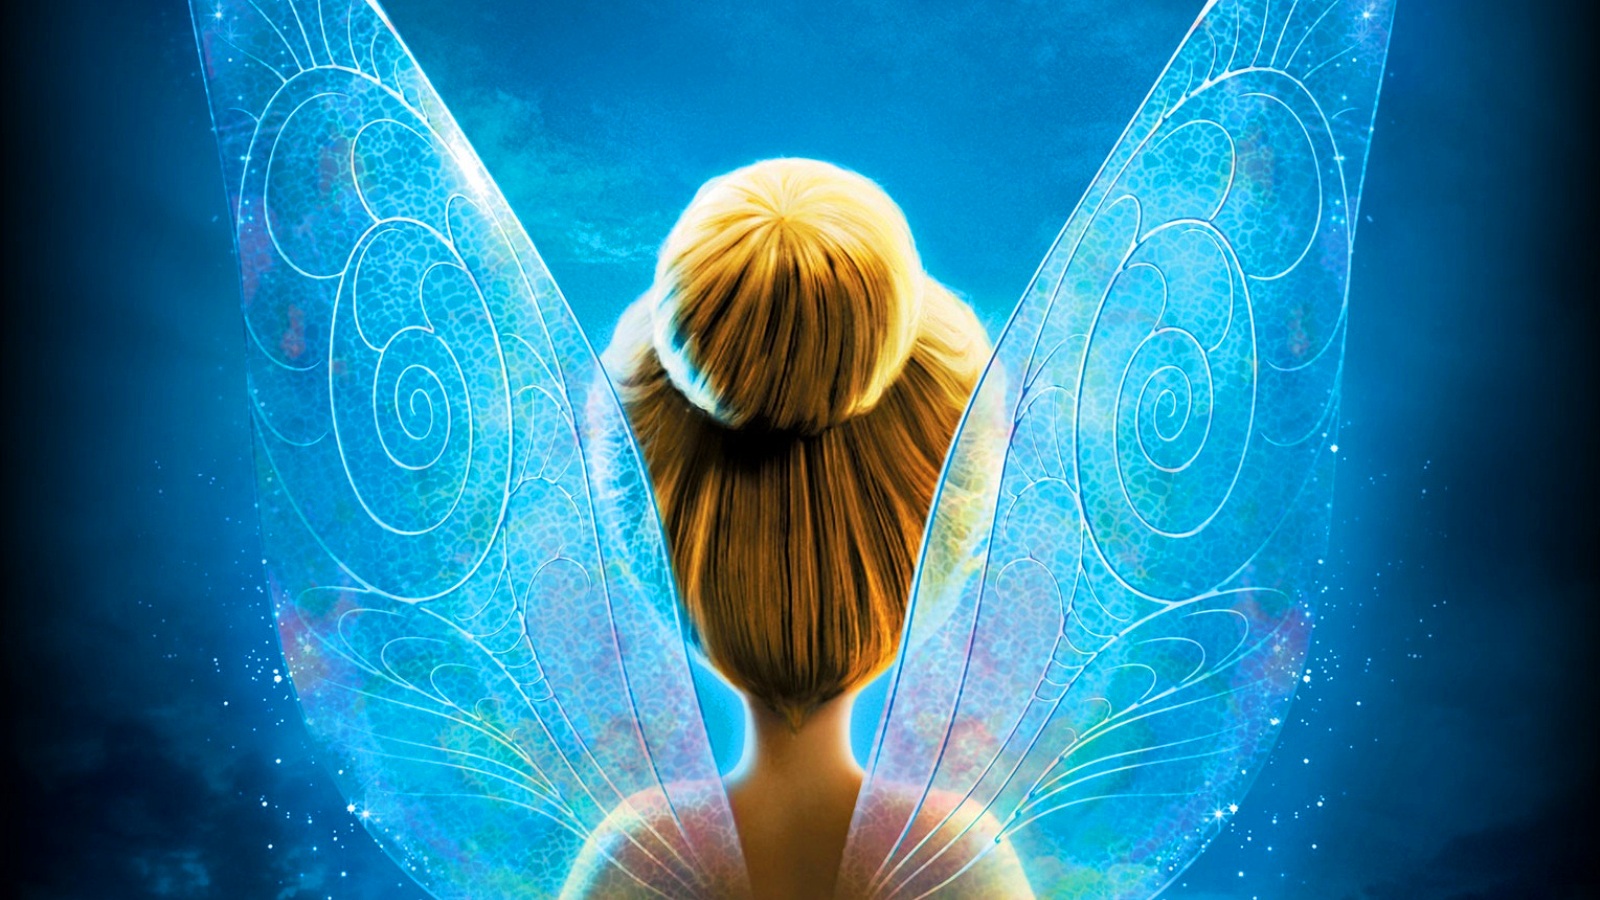 Tinkerbell Secret Of The Wings , HD Wallpaper & Backgrounds